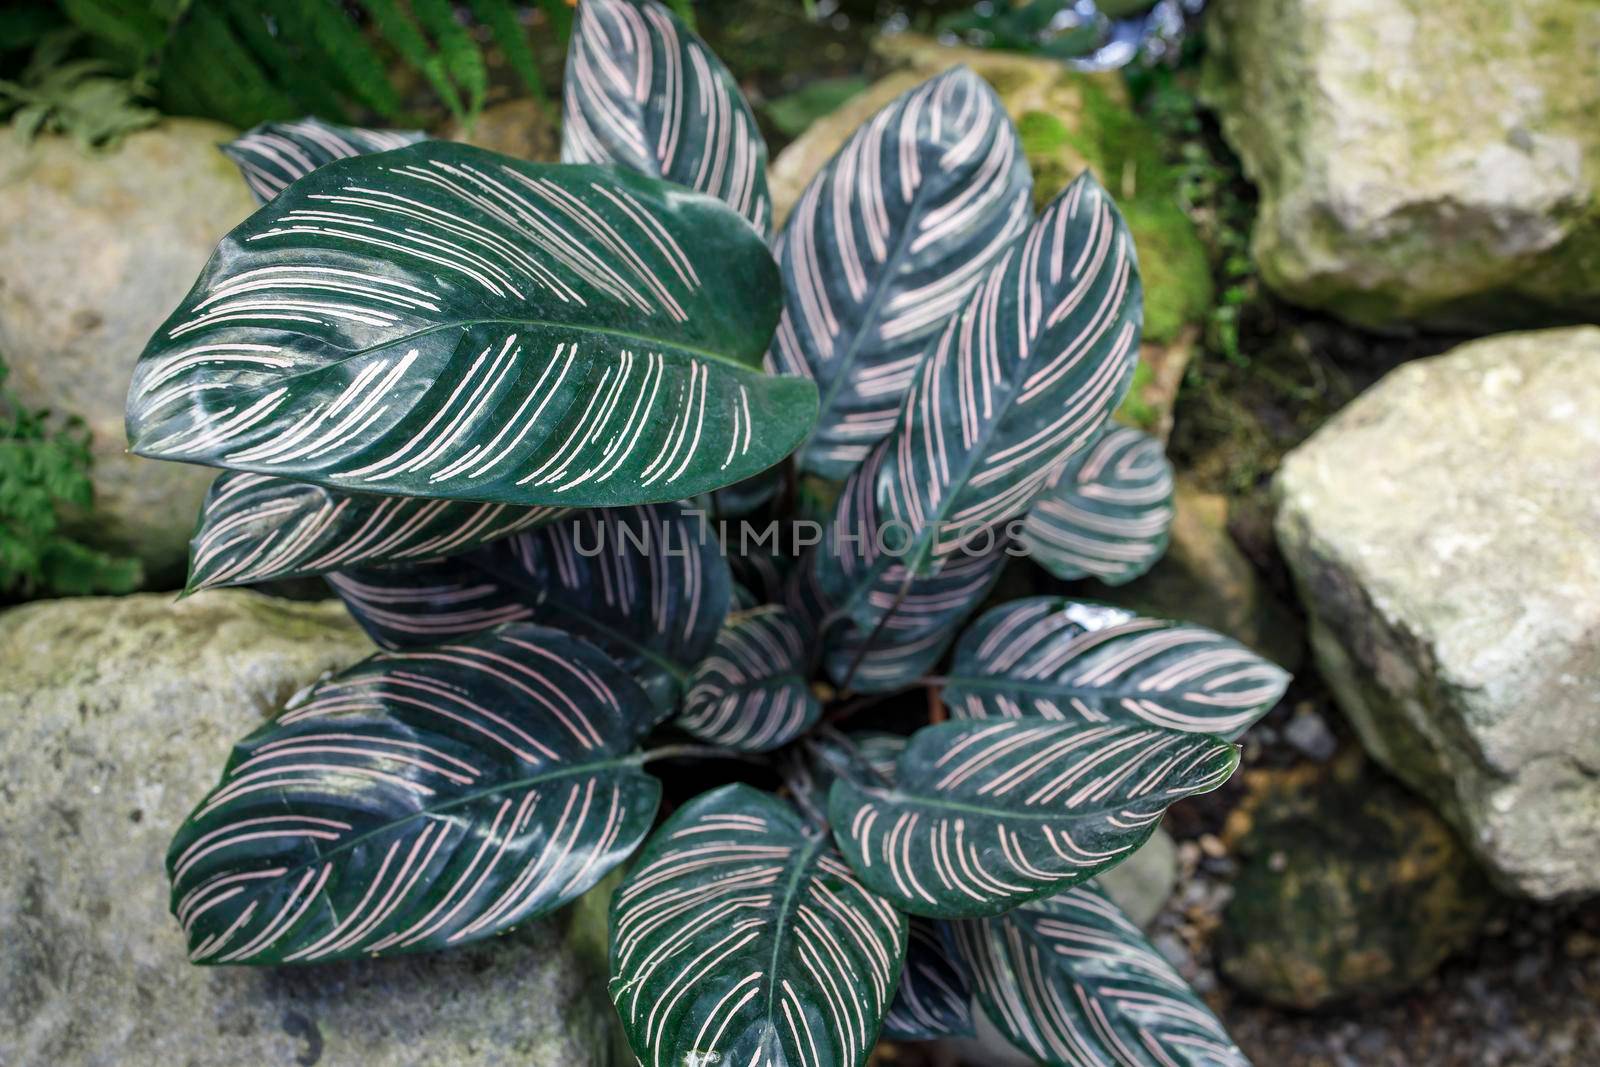 The Peacock plant, also known as Calathea ornata, is a beautiful tropical houseplant, famed for its beautiful, contrasting green and purplish-red leaves by elenarostunova